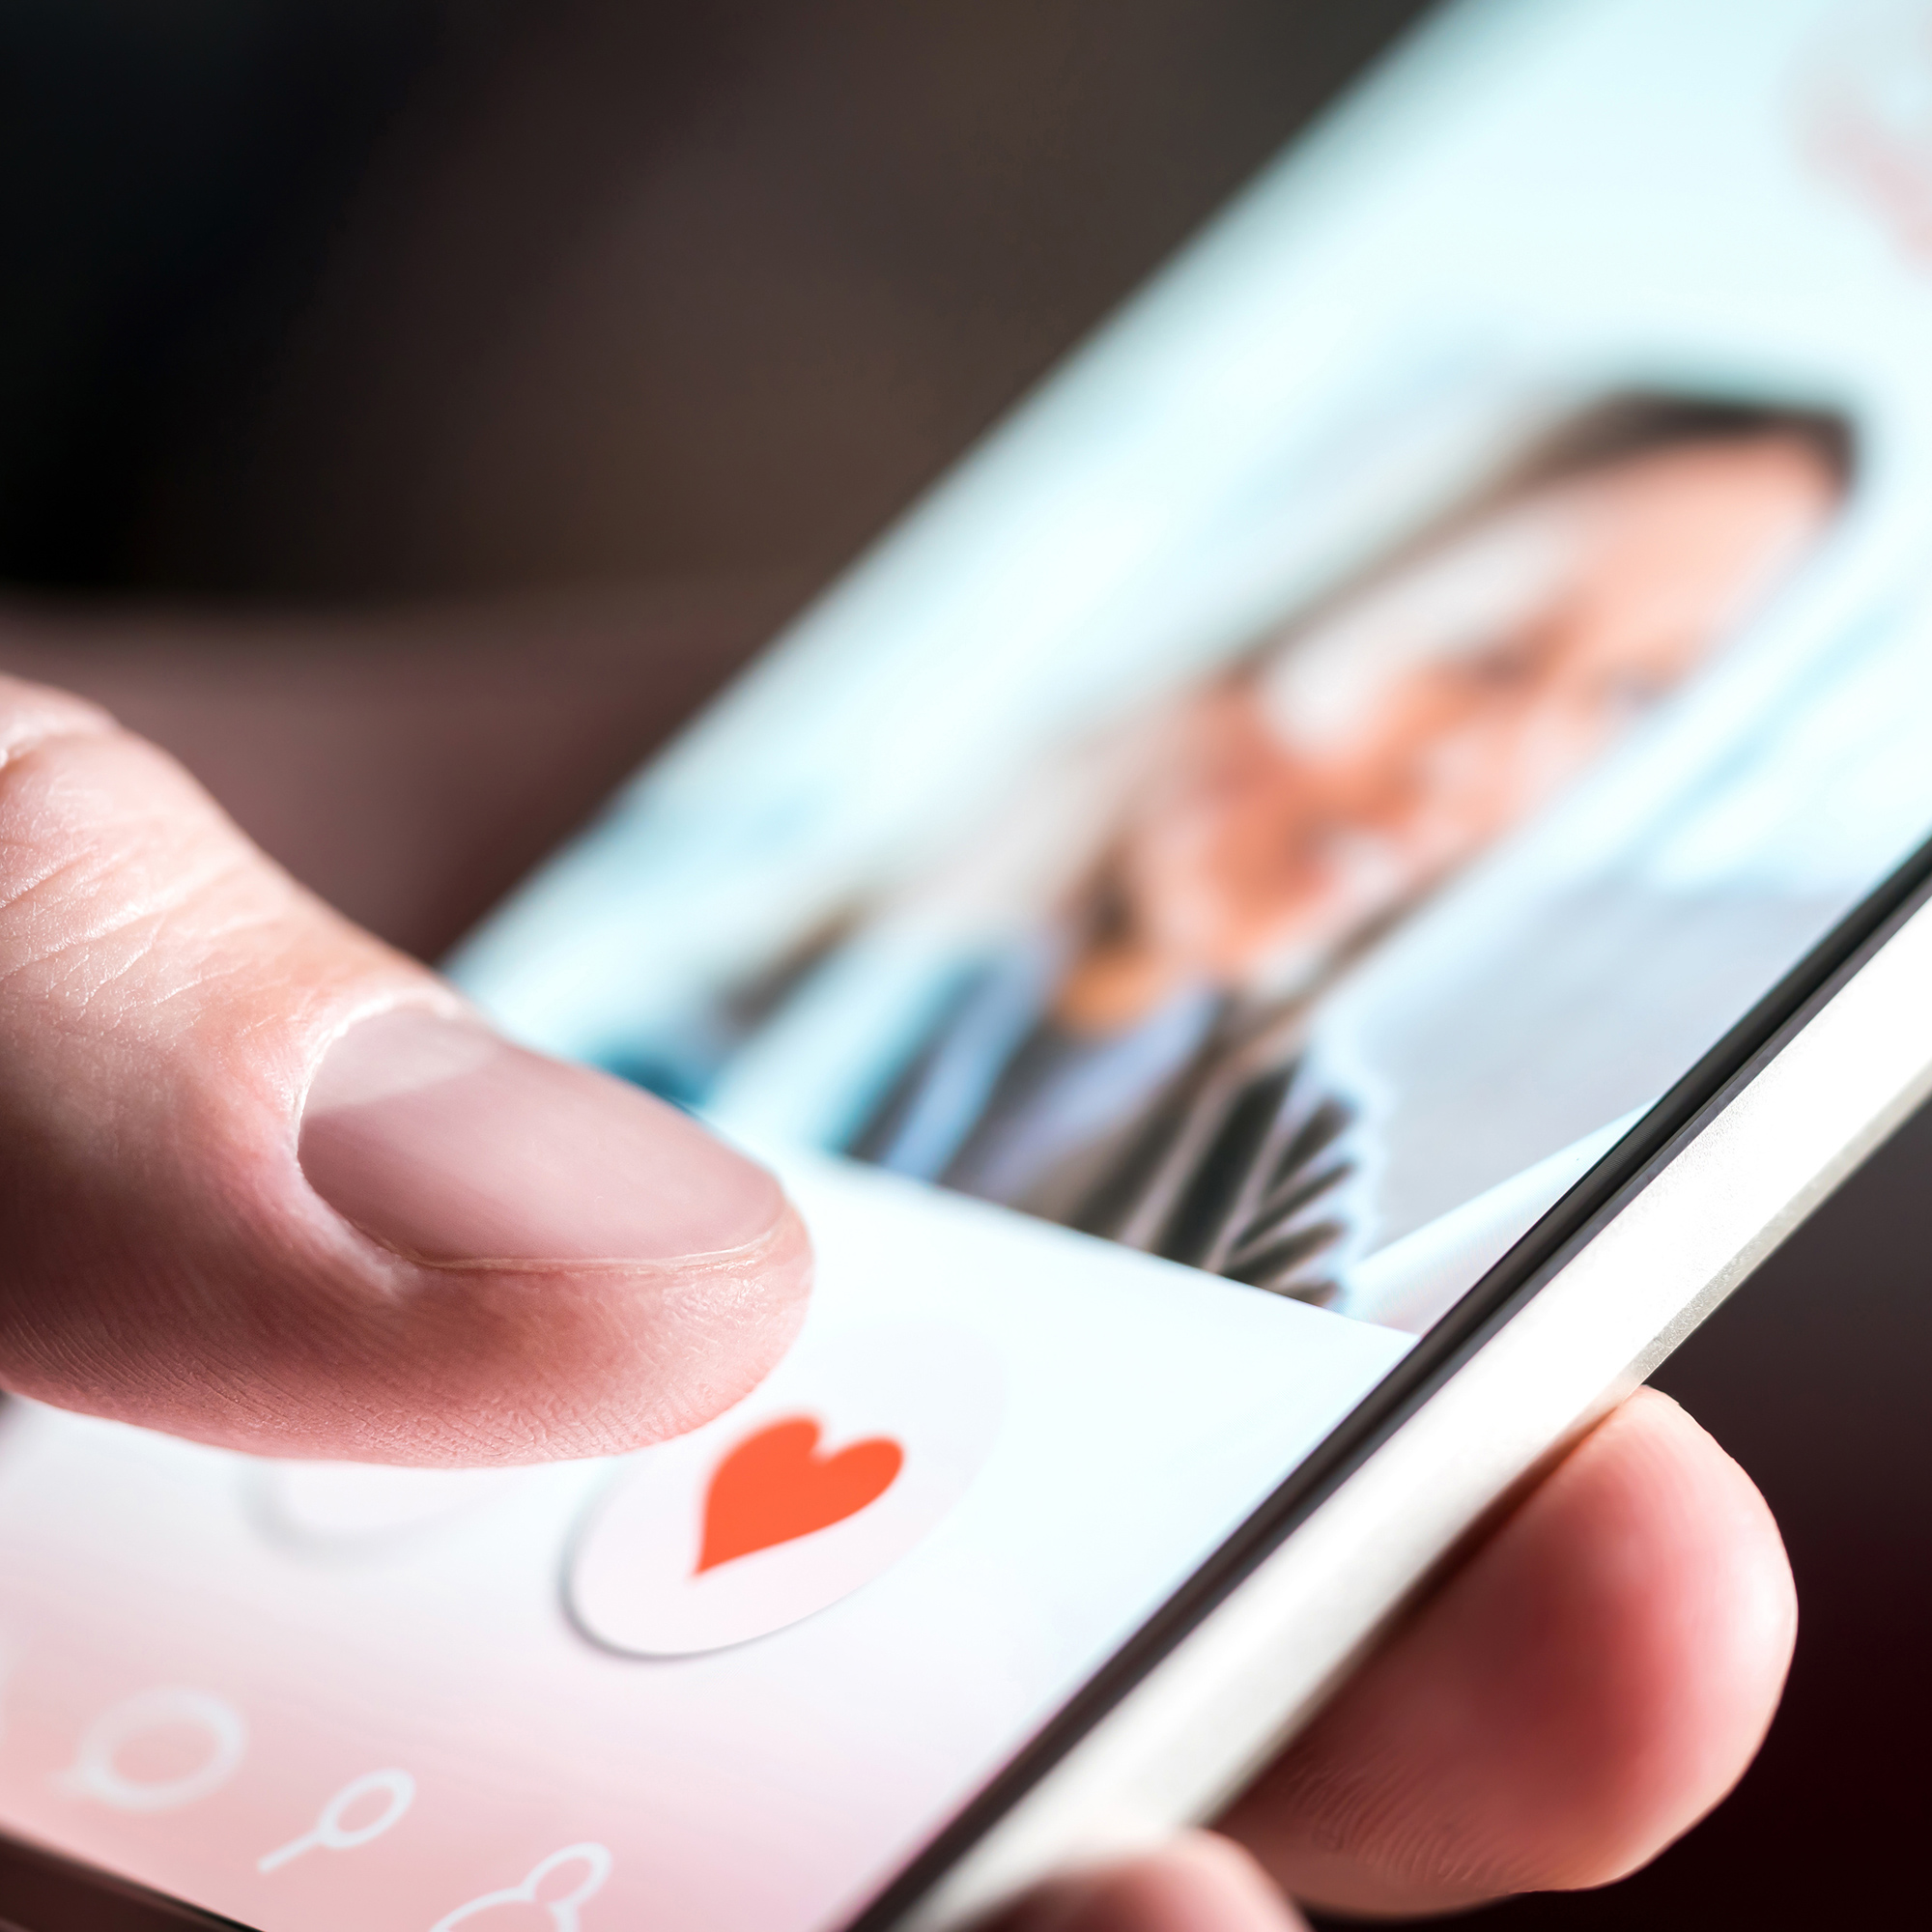 A close up image of someone's profile on a smartphone, the thumb of the person looking at the image has just tapped the red heart button on the screen as it's lit up.